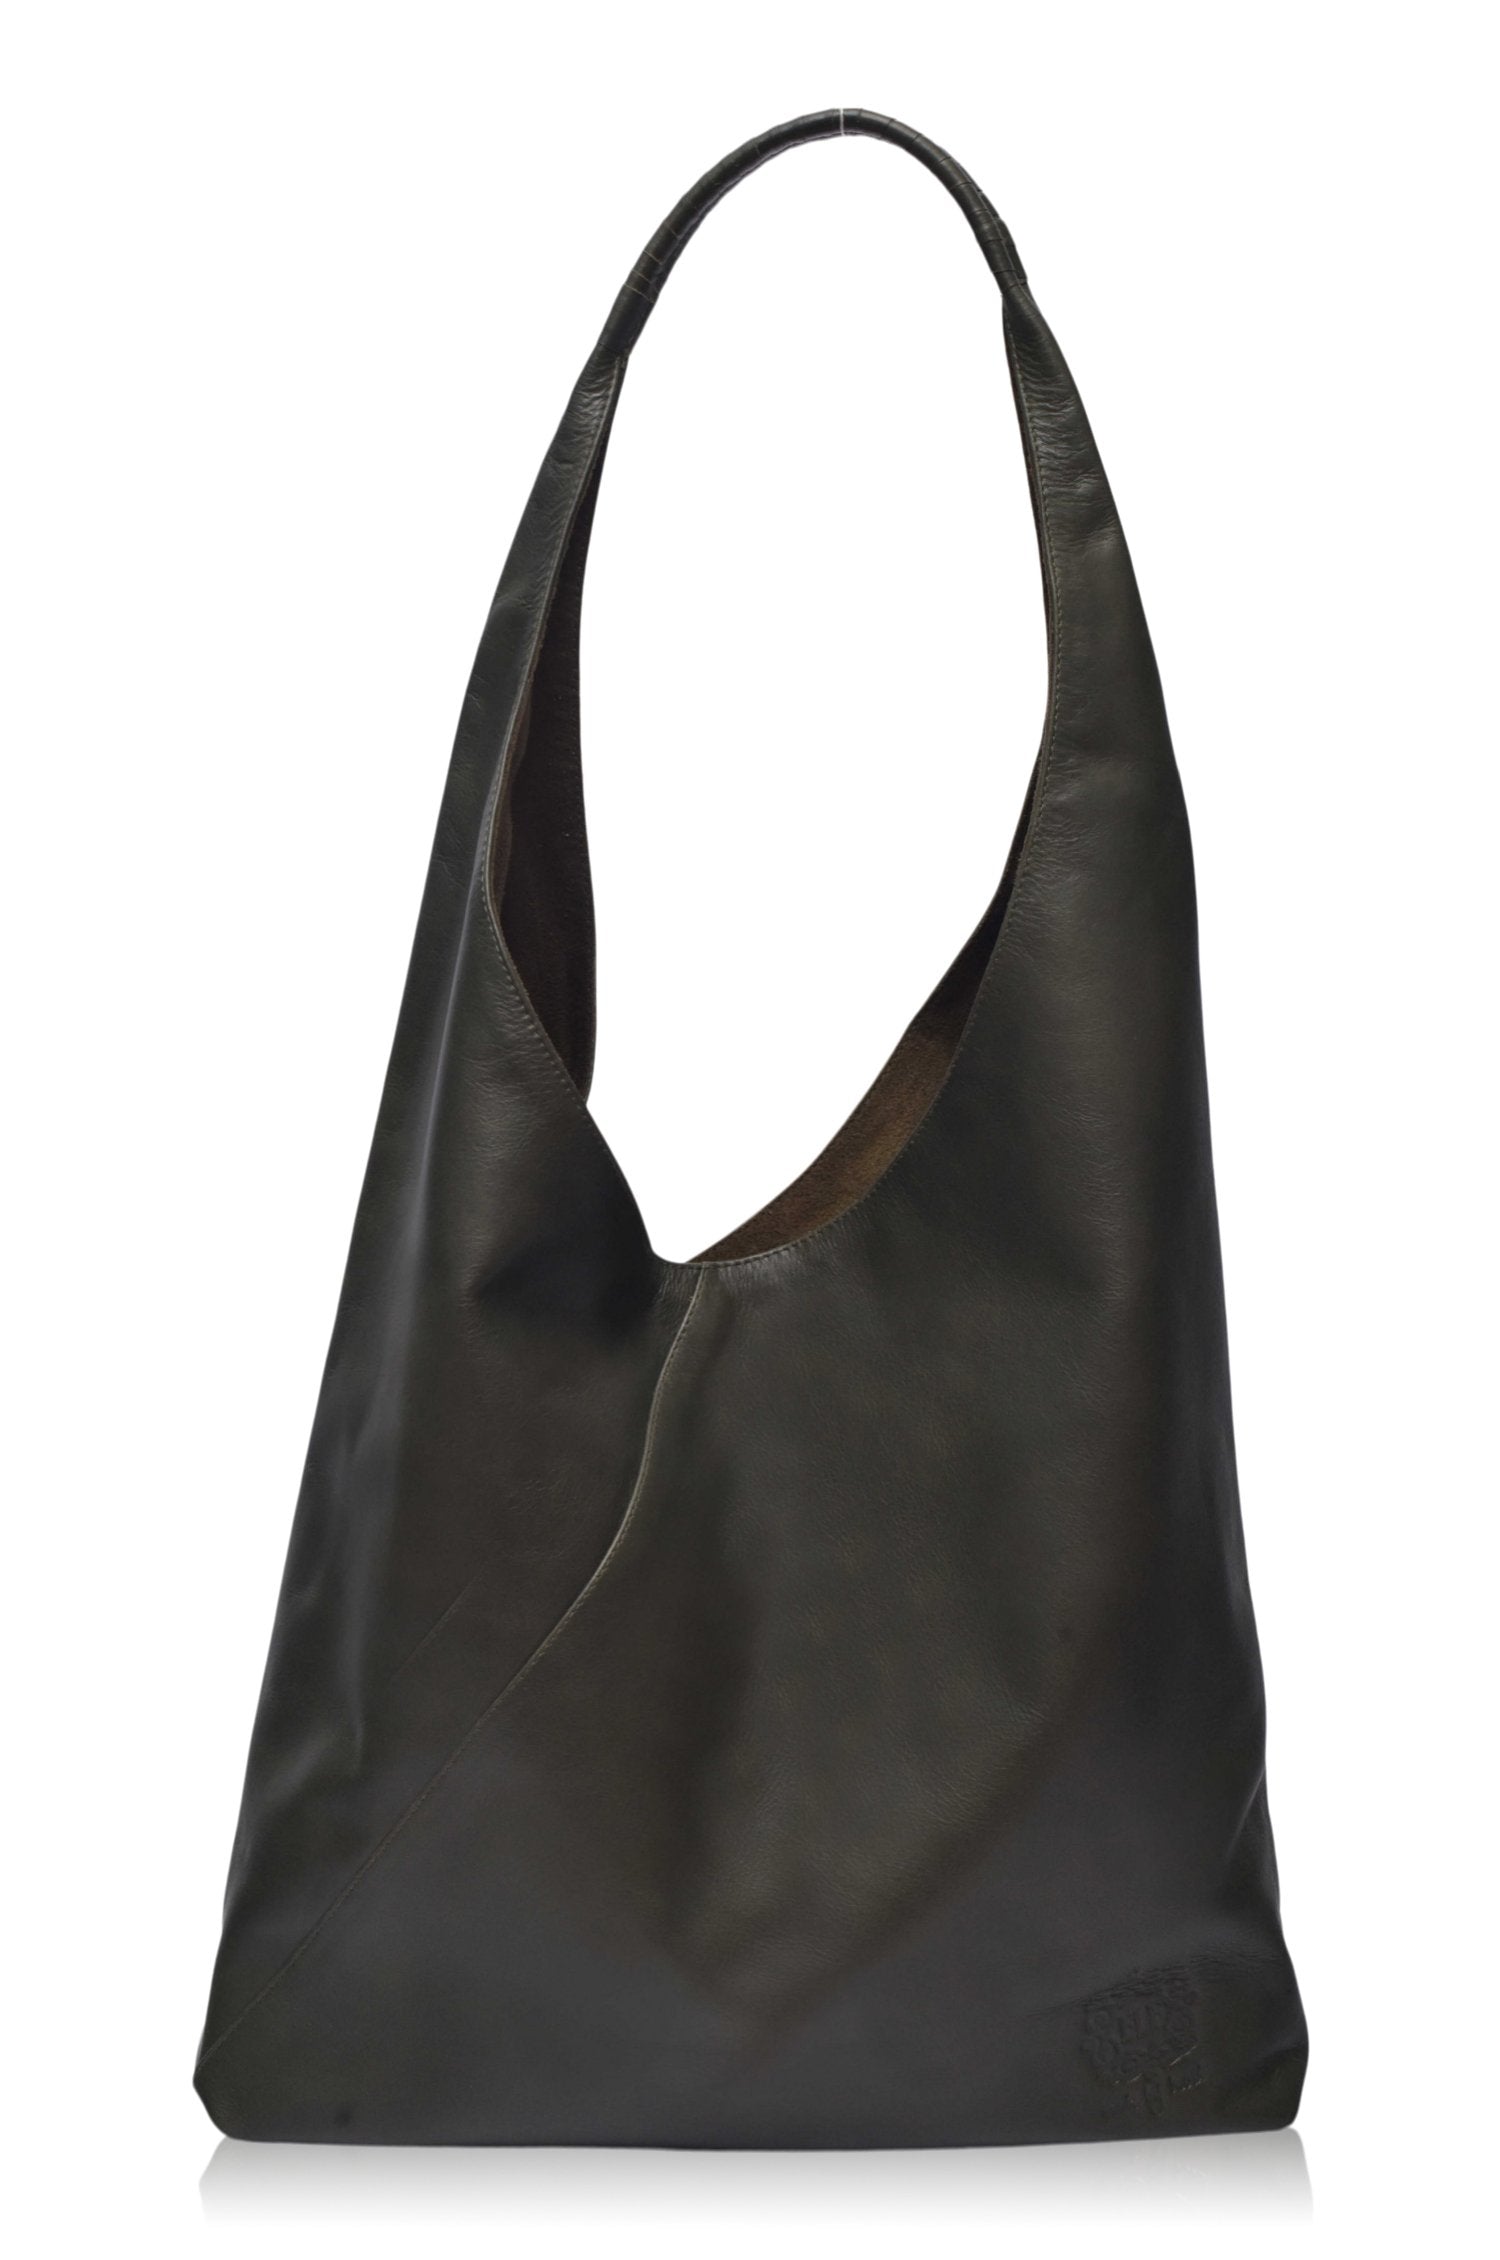 Black Leather Hobo Bag - Slouchy Leather Purse For Women